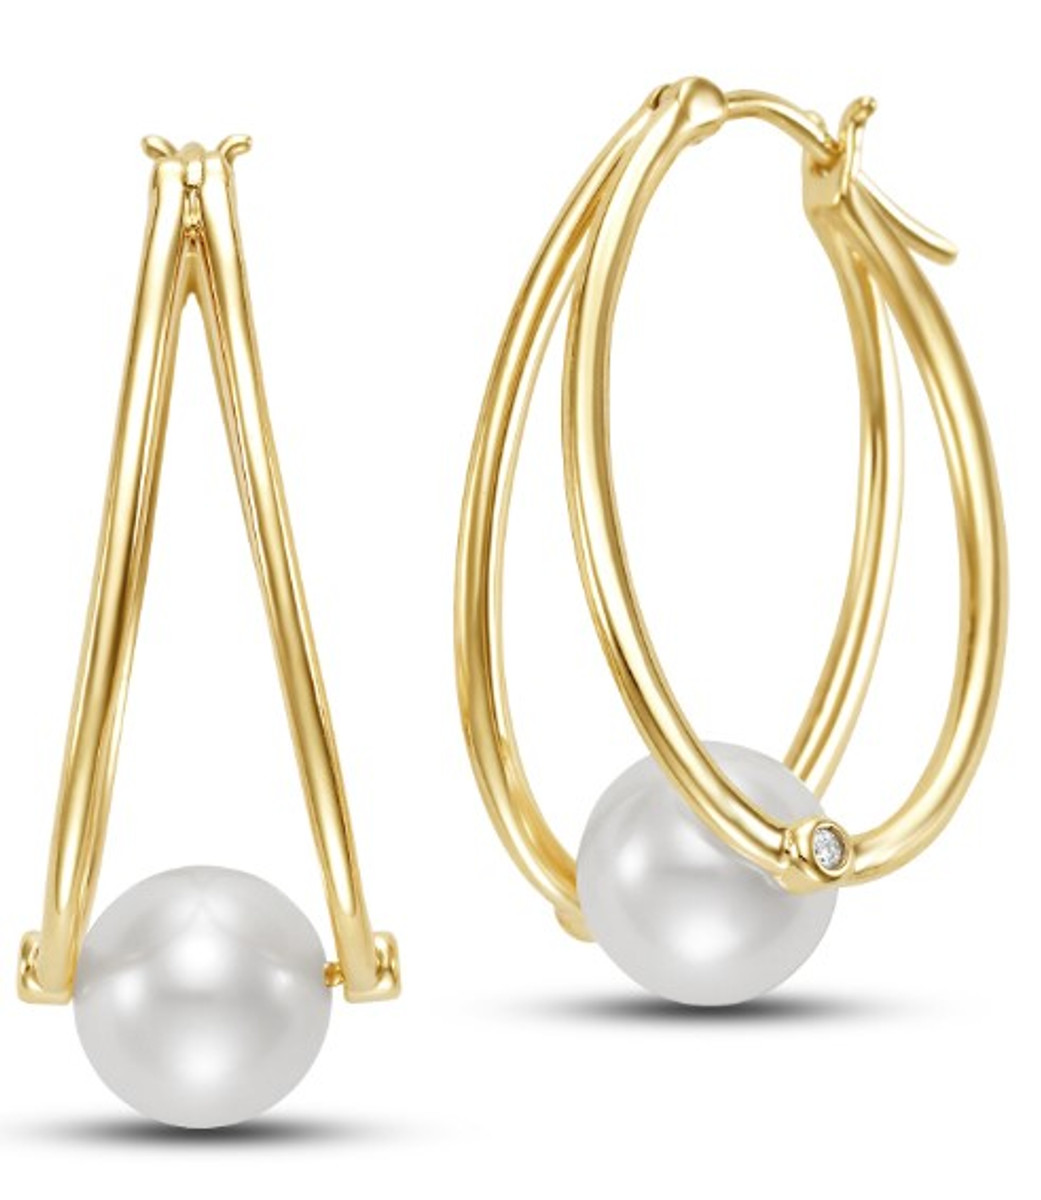 Hyde Park Collection 14K Yellow Gold Pearl Hoop Earrings-58546 Product Image